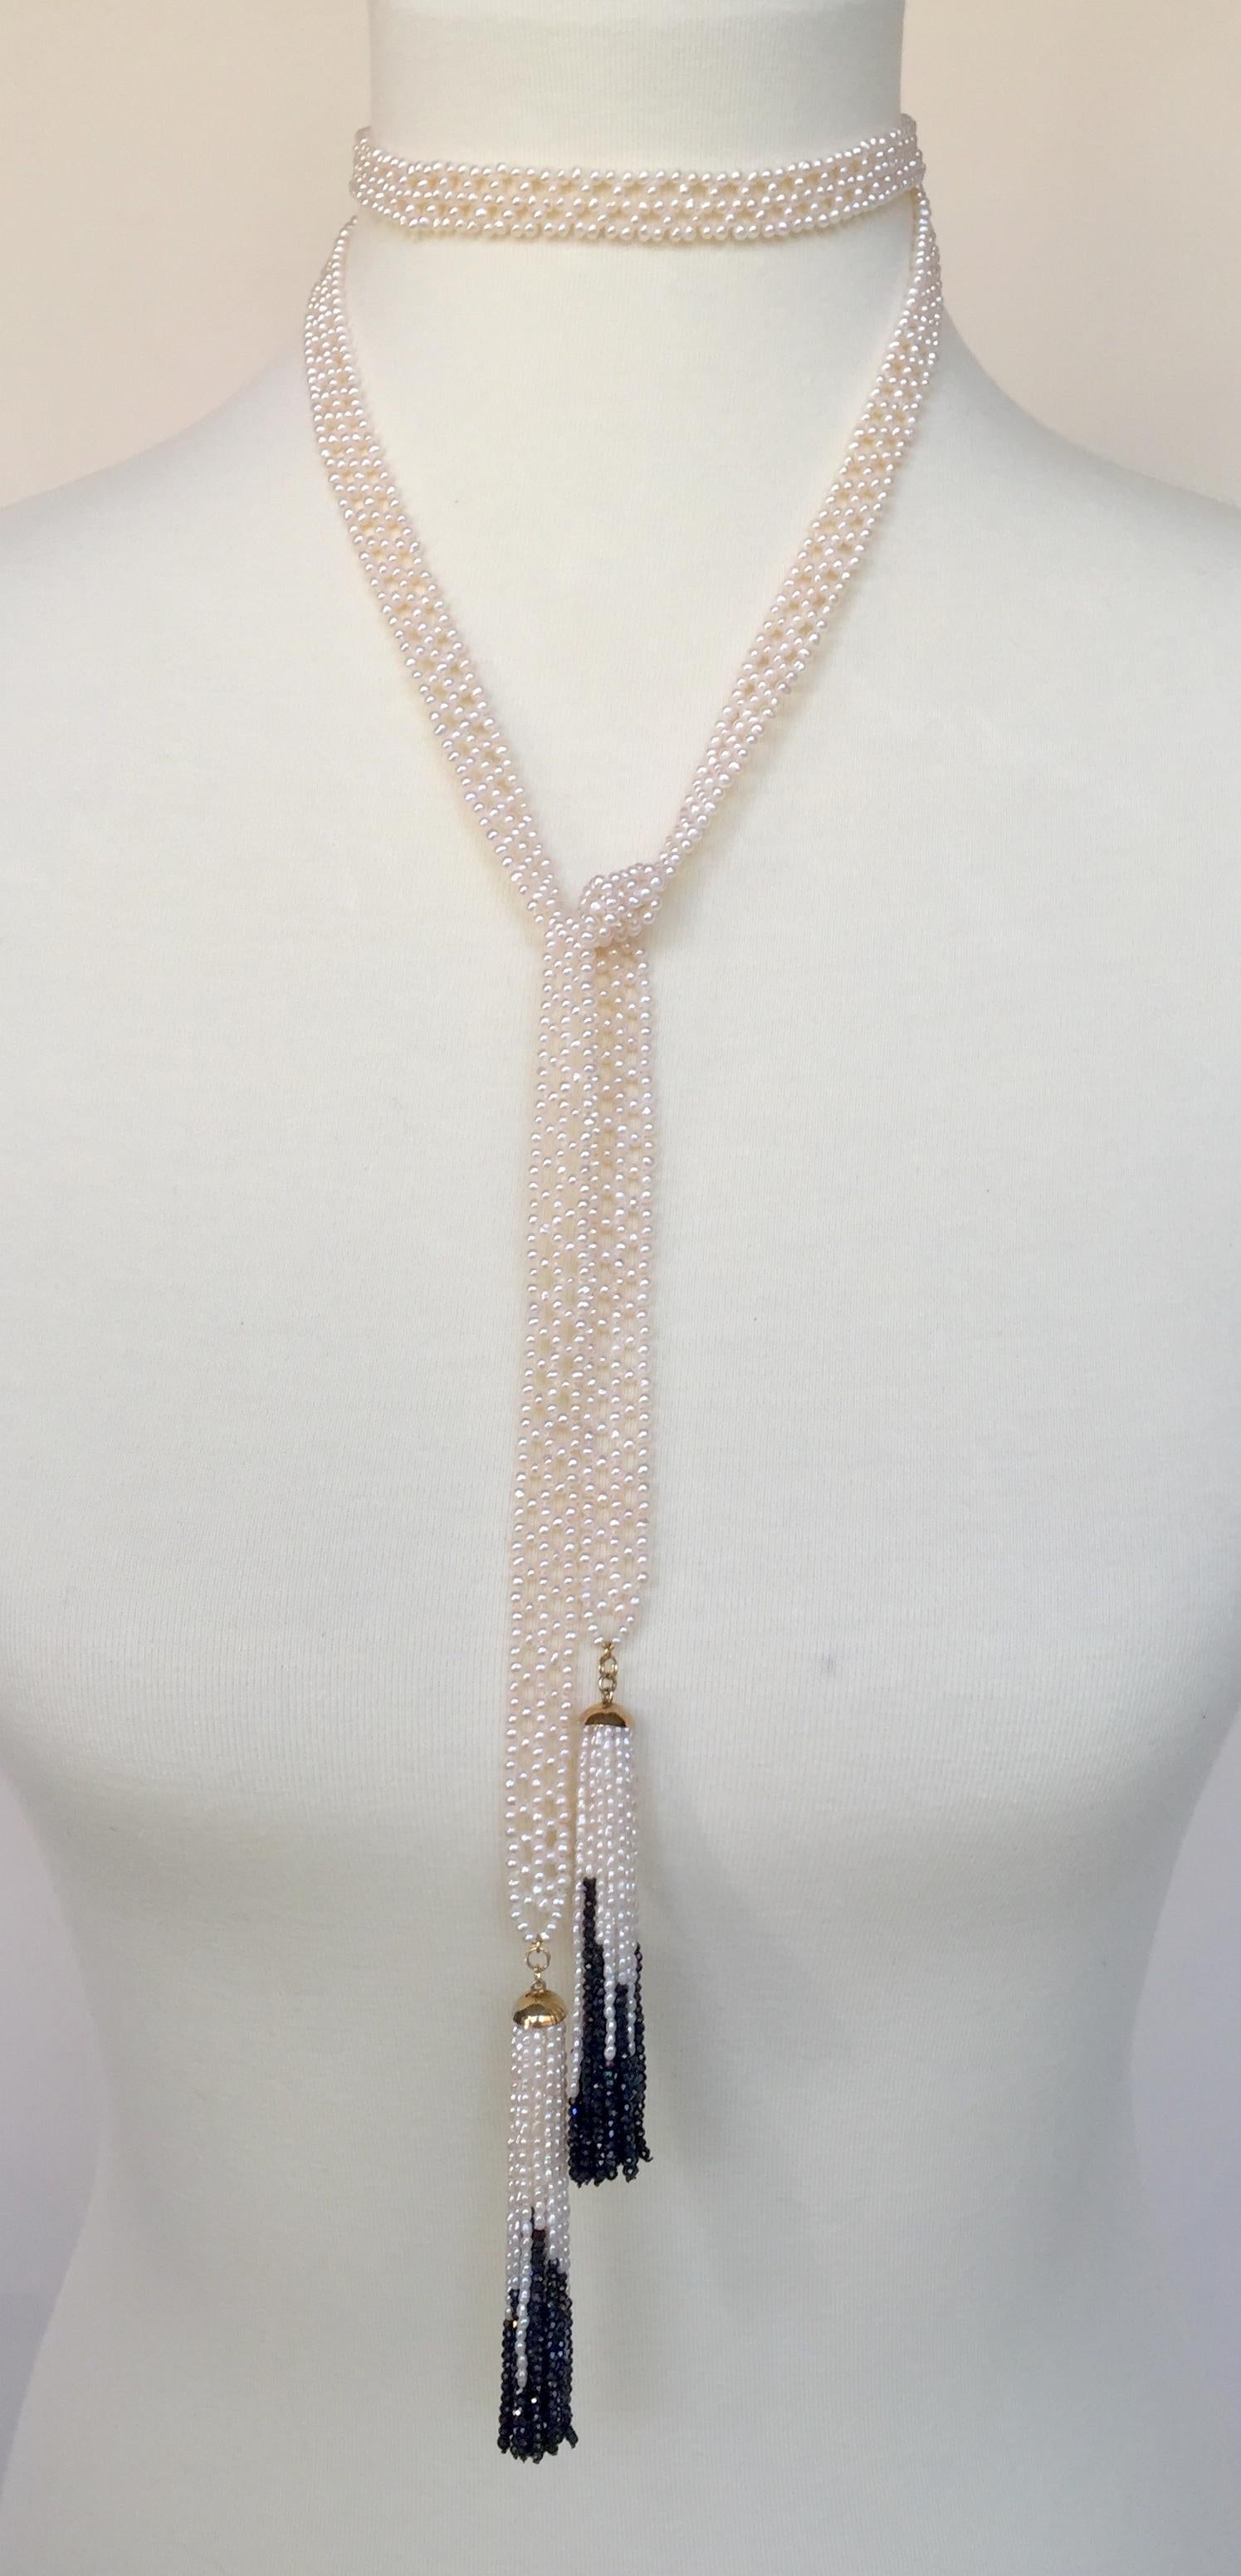 Woven White Pearl Sautoir with 14 Karat Gold, Pearl, and Black Spinel Tassels (Künstler*in)